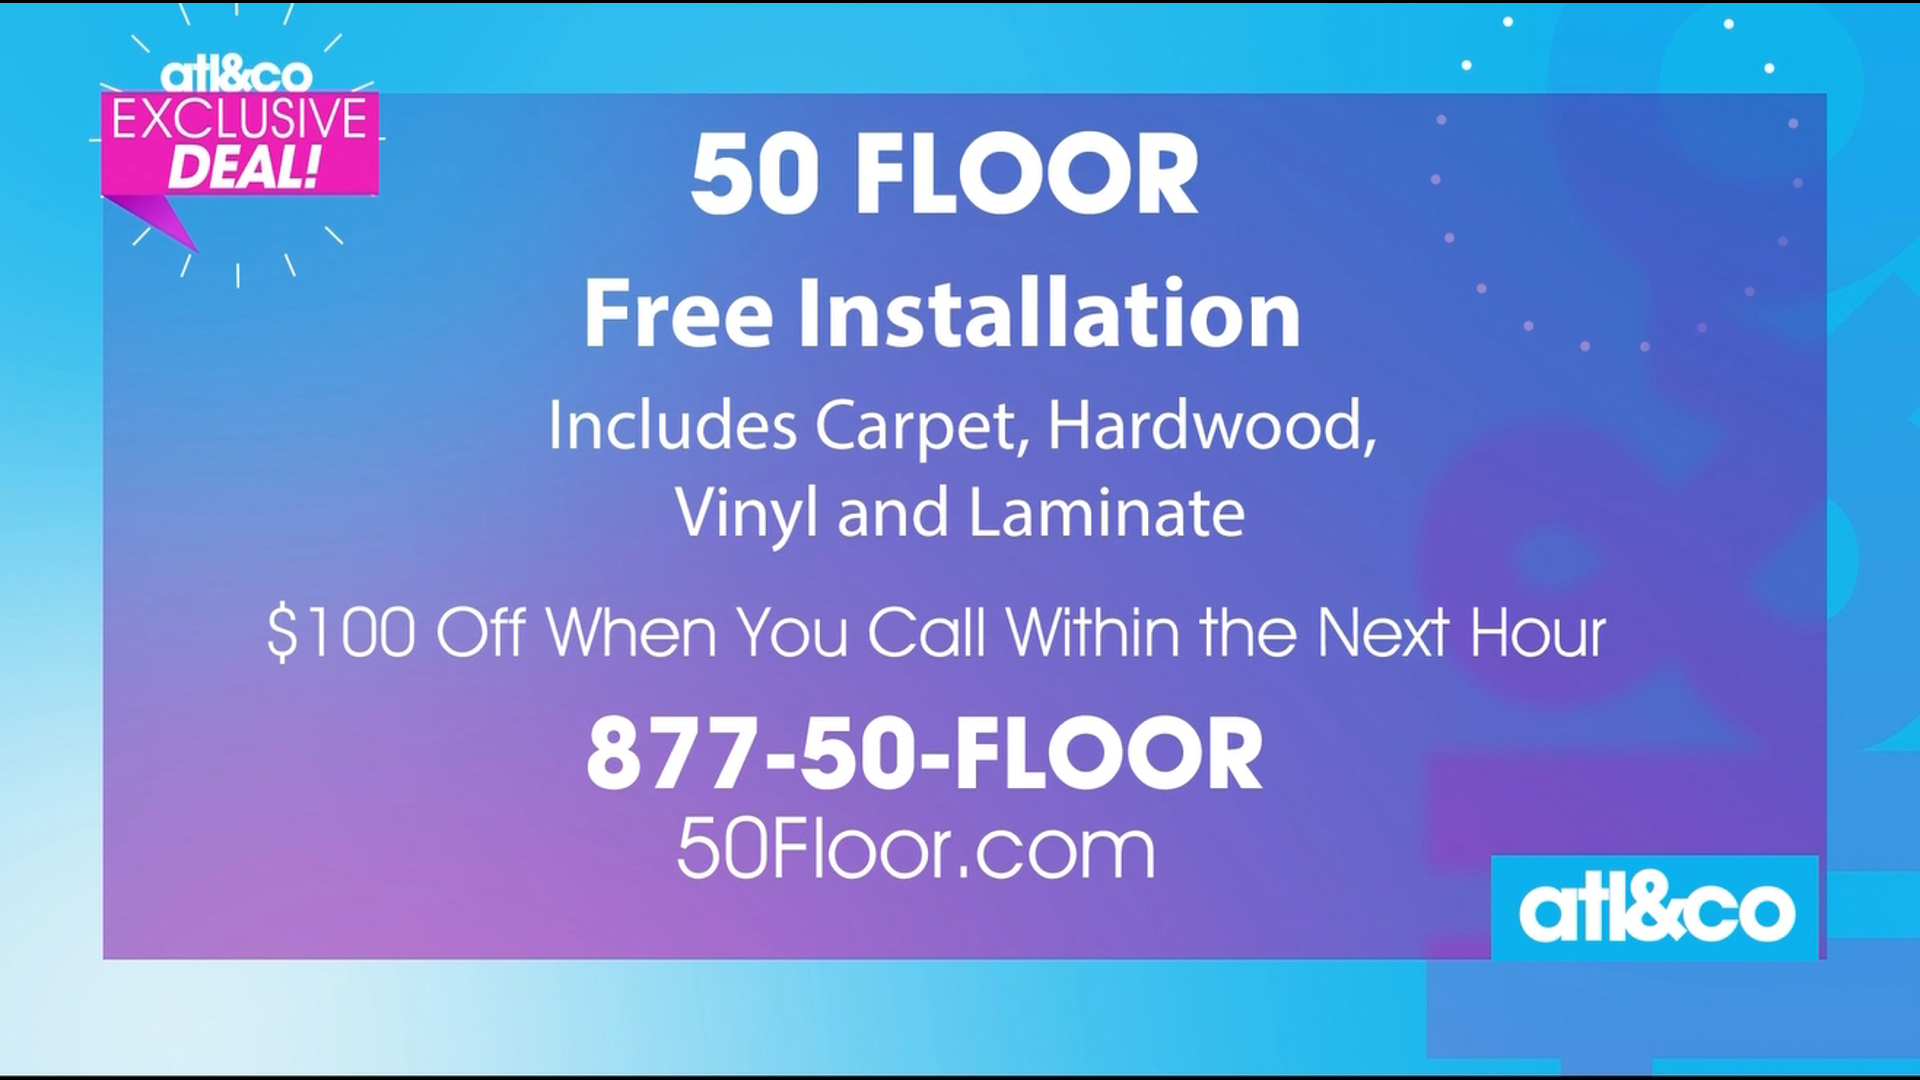 Tackle your home improvement projects with ease with the pros at 50 Floor and get free installation and $100 off your entire order.